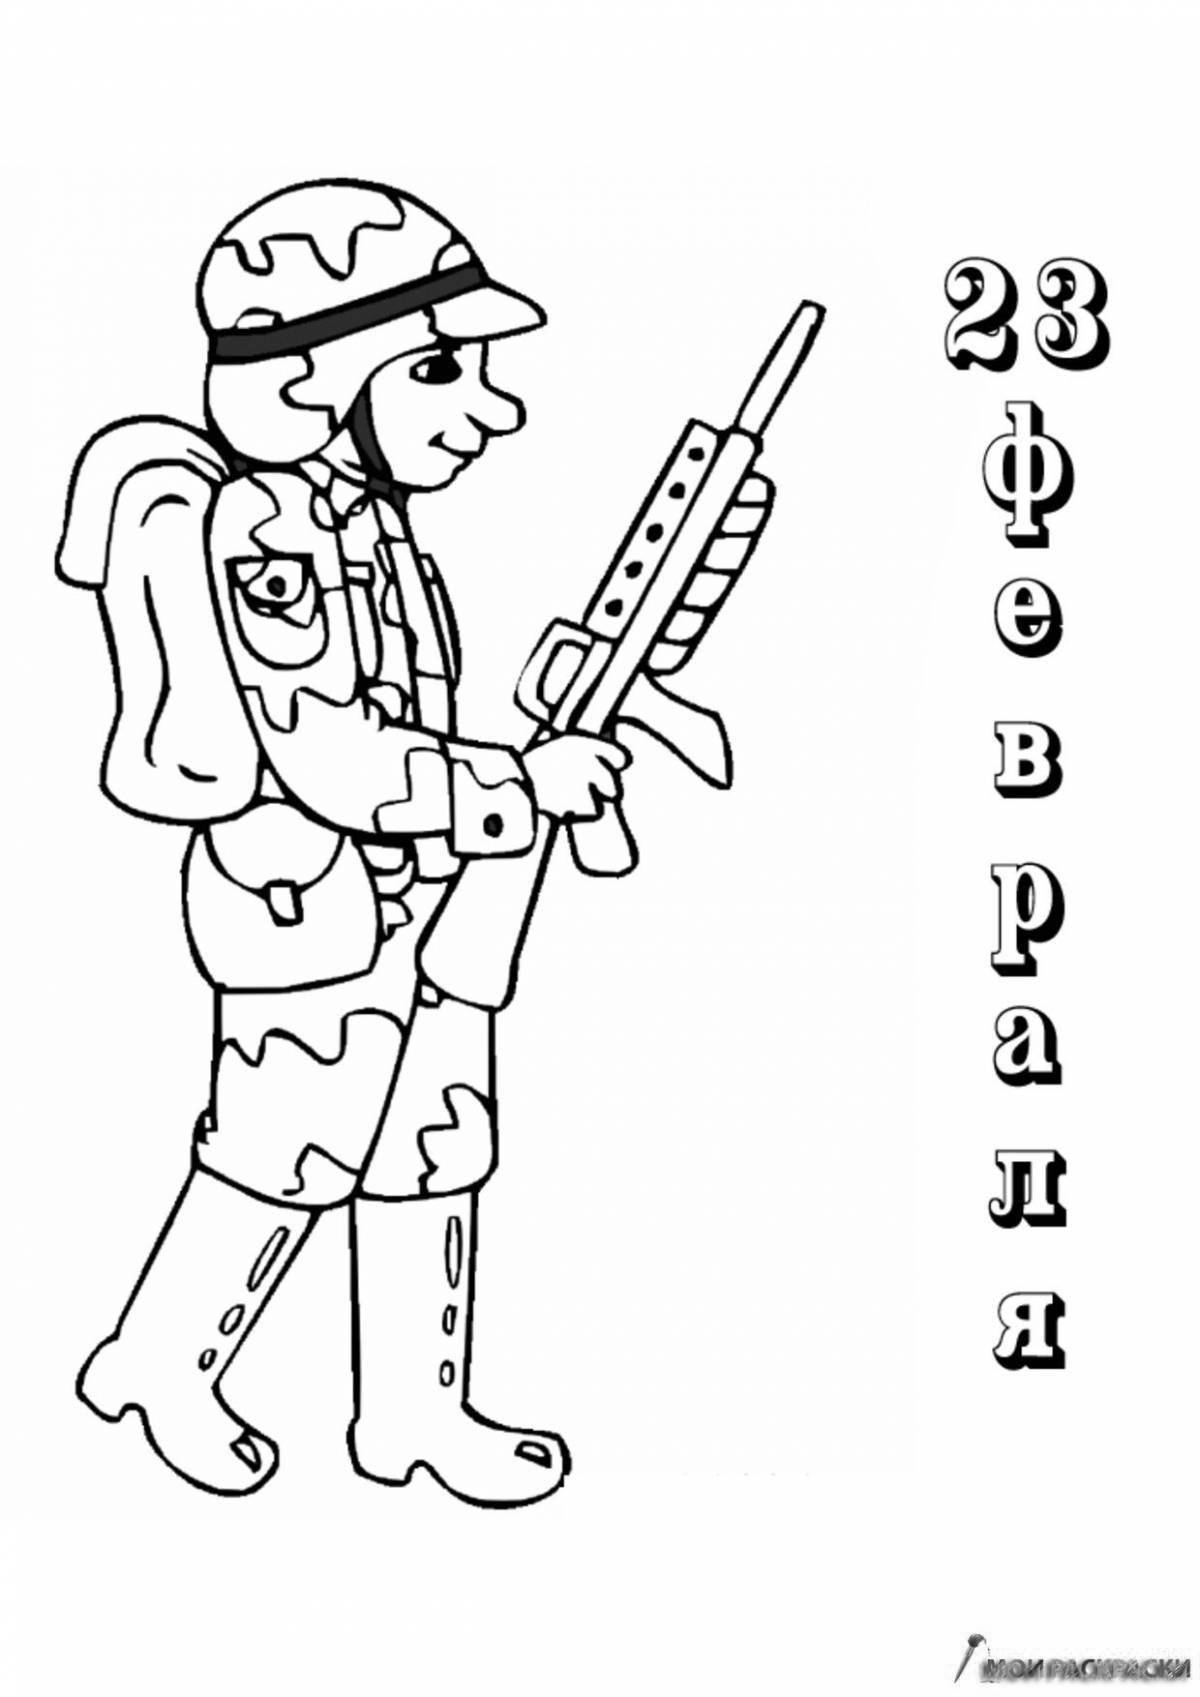 Colorful toy soldiers coloring for boys